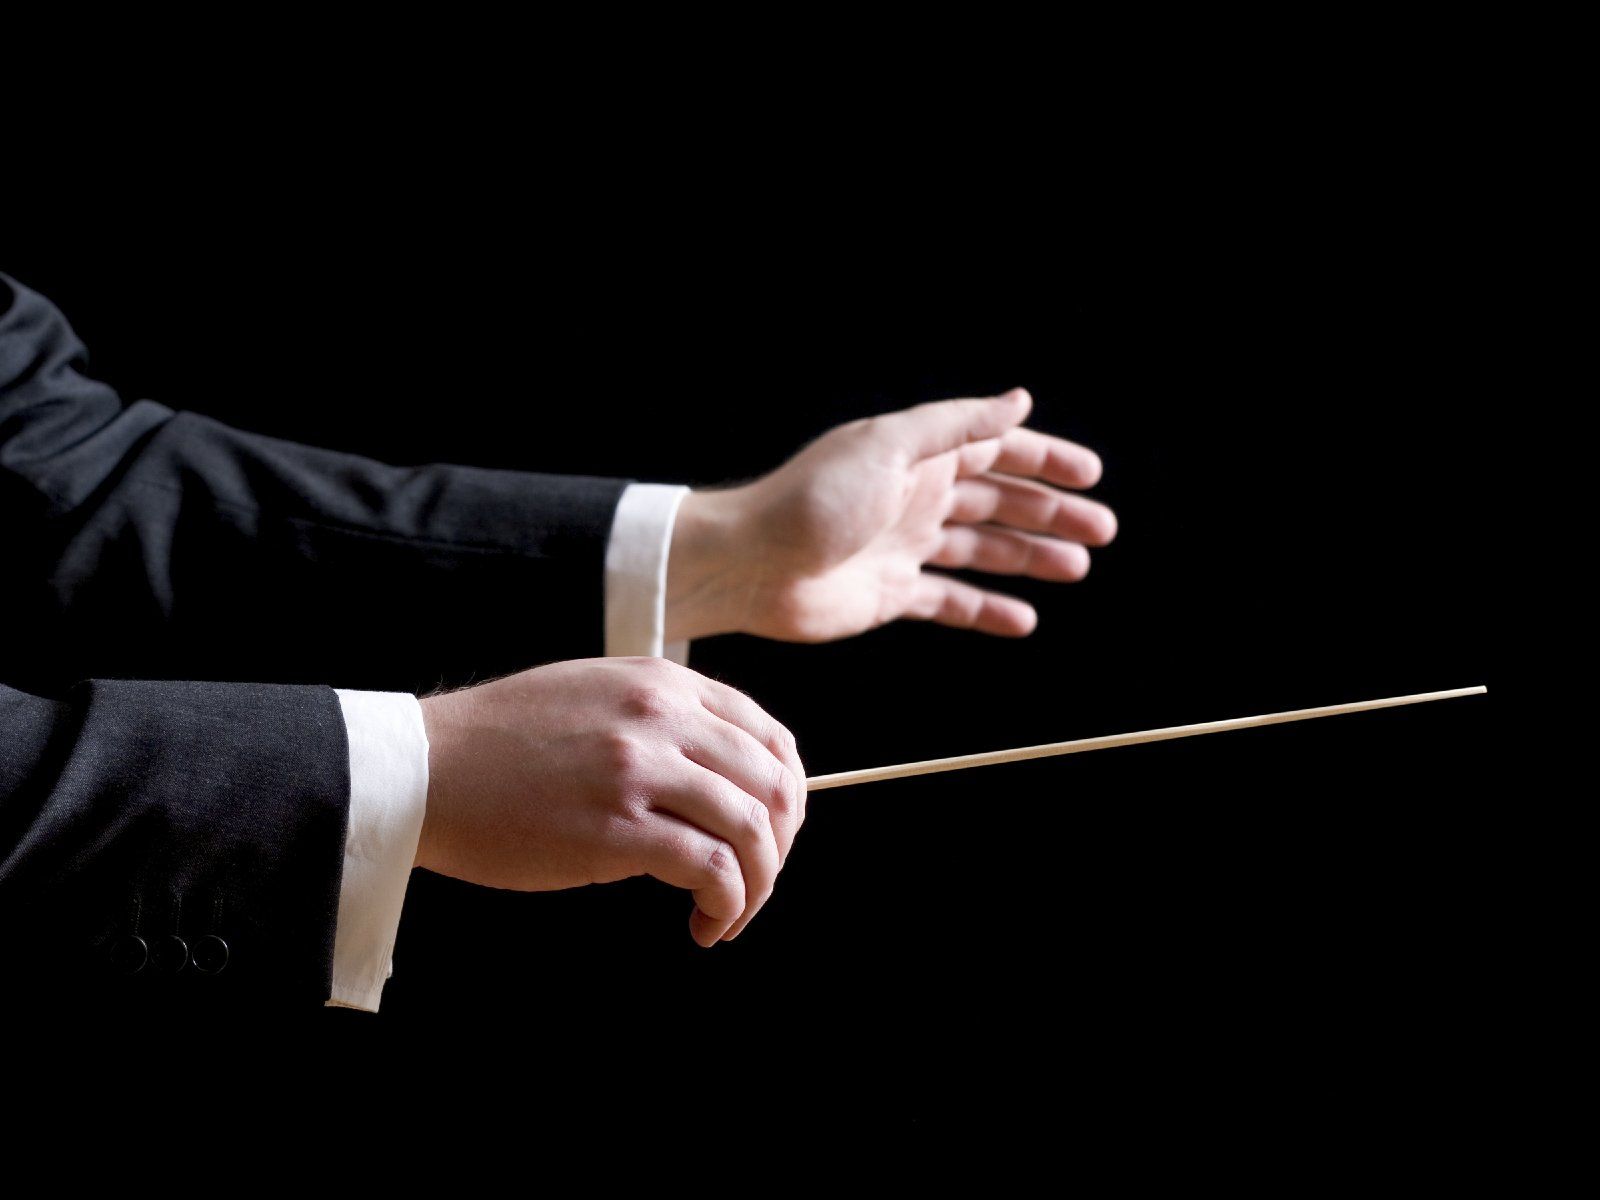 The two hands of a musical conductor with baton, against a black background